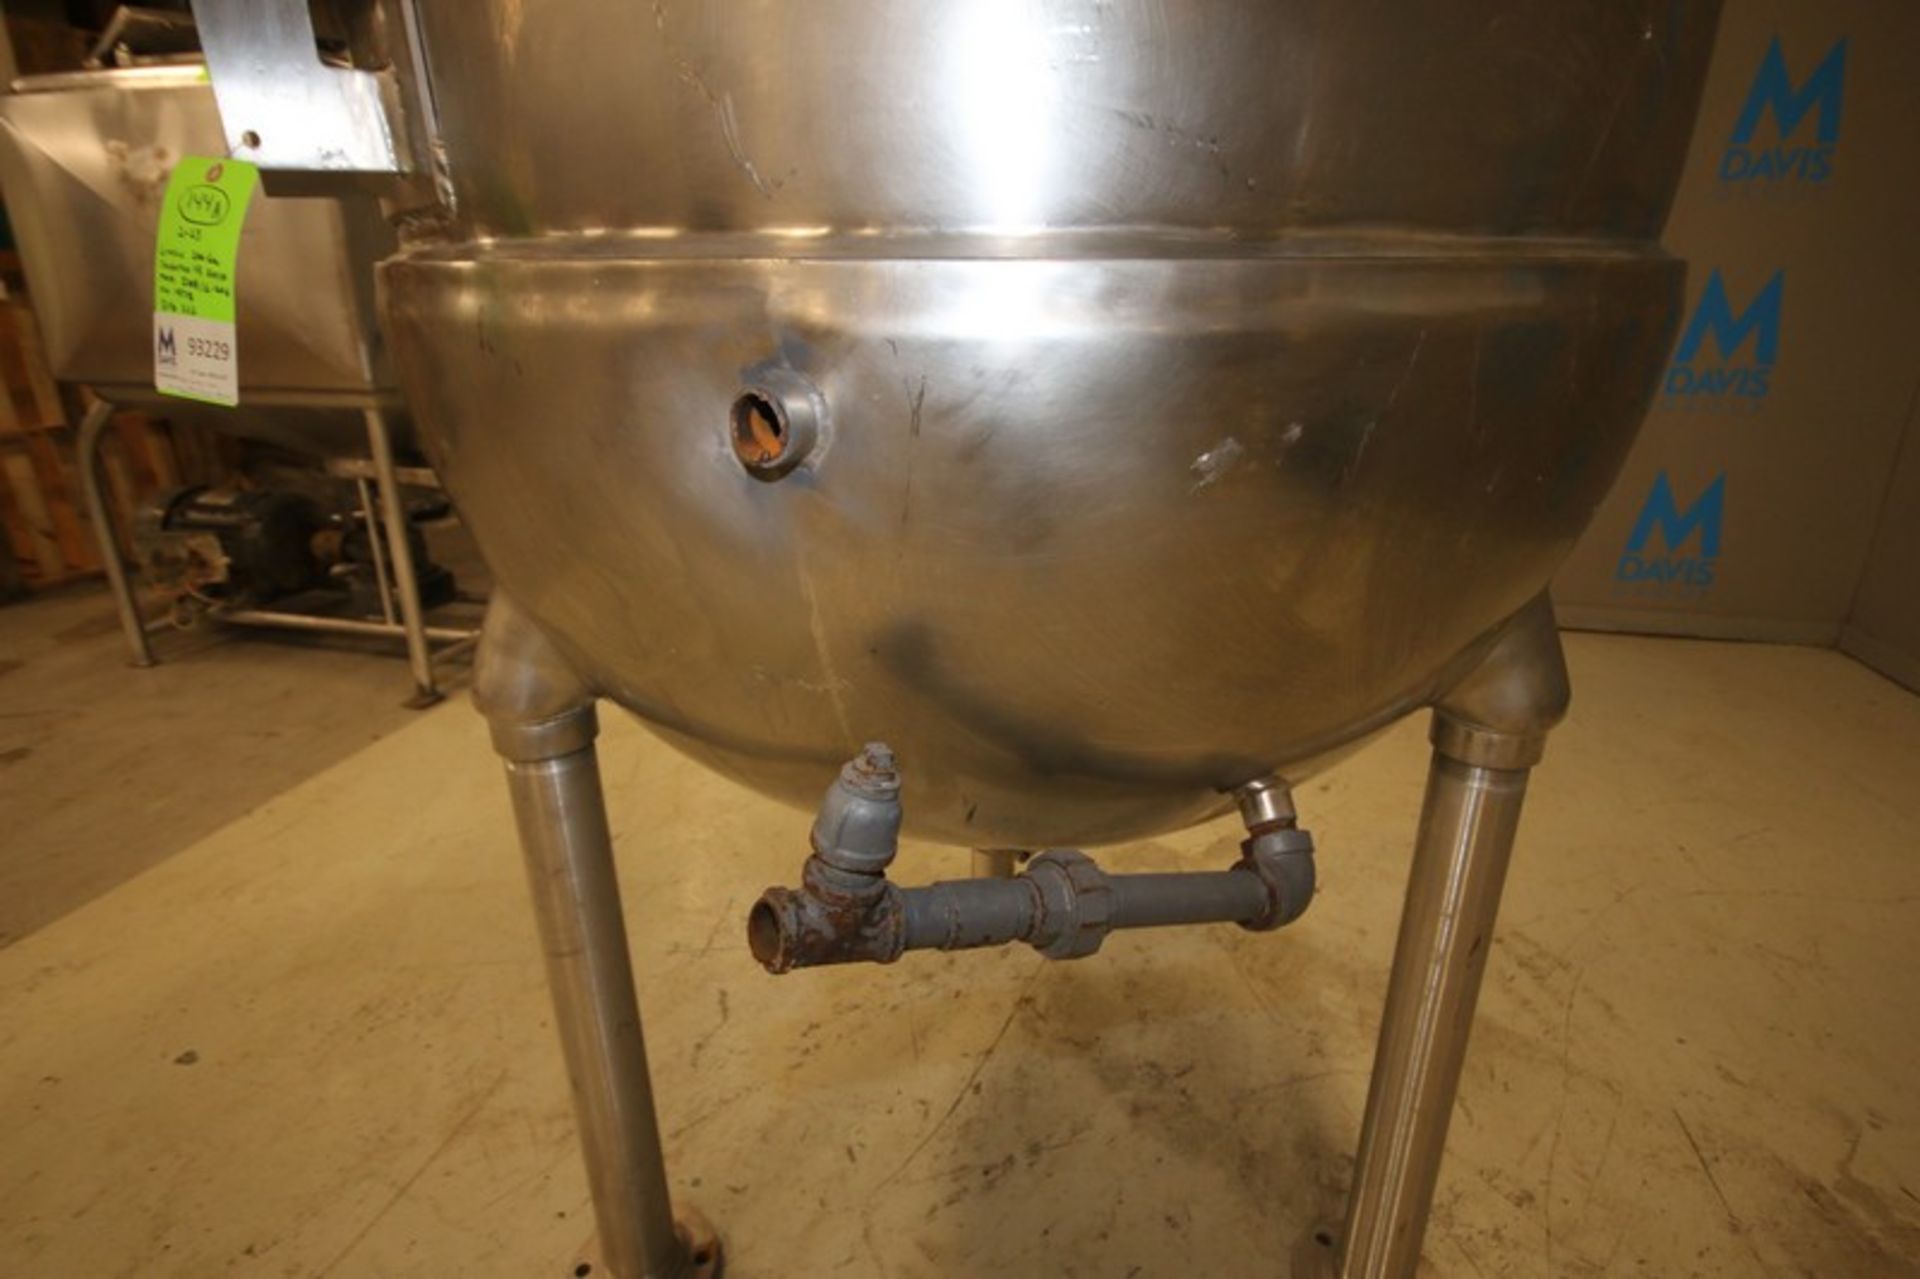 Groen 200 Gal. S/S Jacketed Kettle, Model INA / 2-200, SN 1978, BN 88764, with Scrape Surface Off- - Image 6 of 7